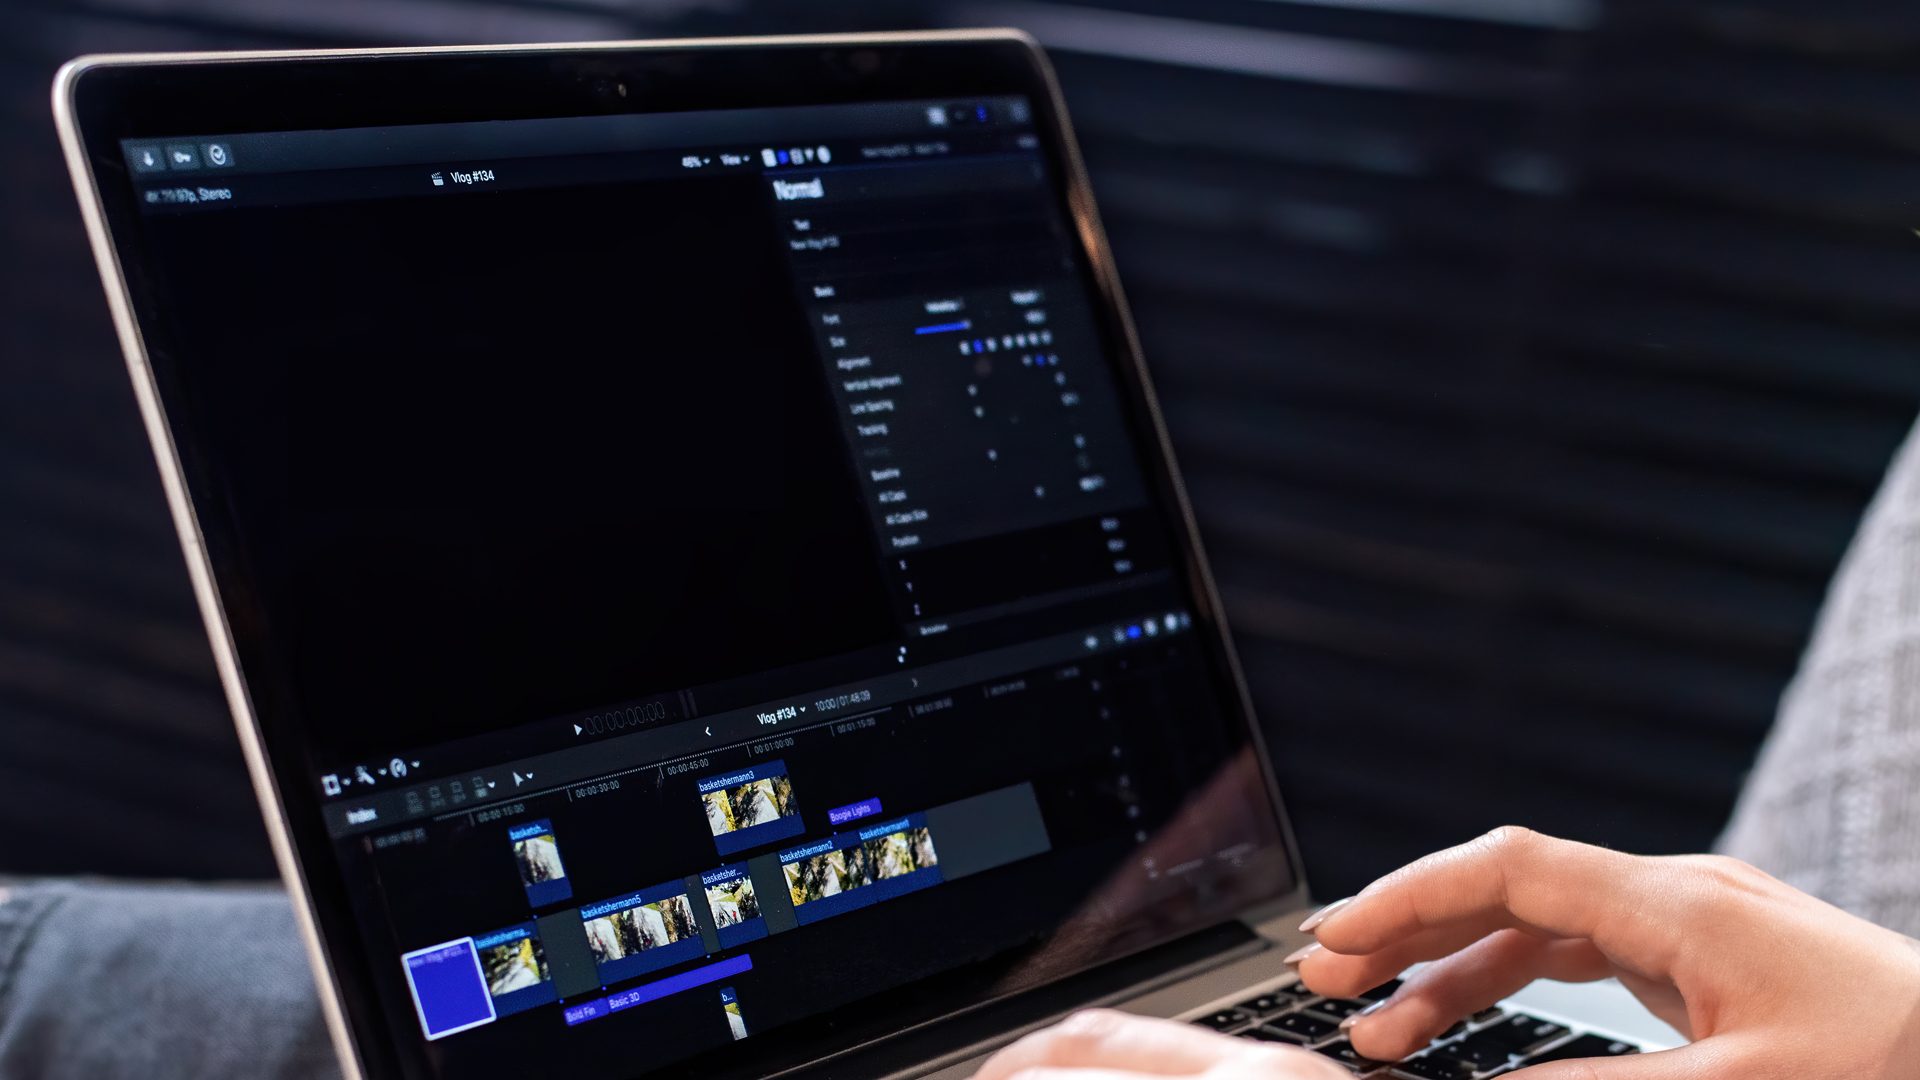 which mac is better for video editing